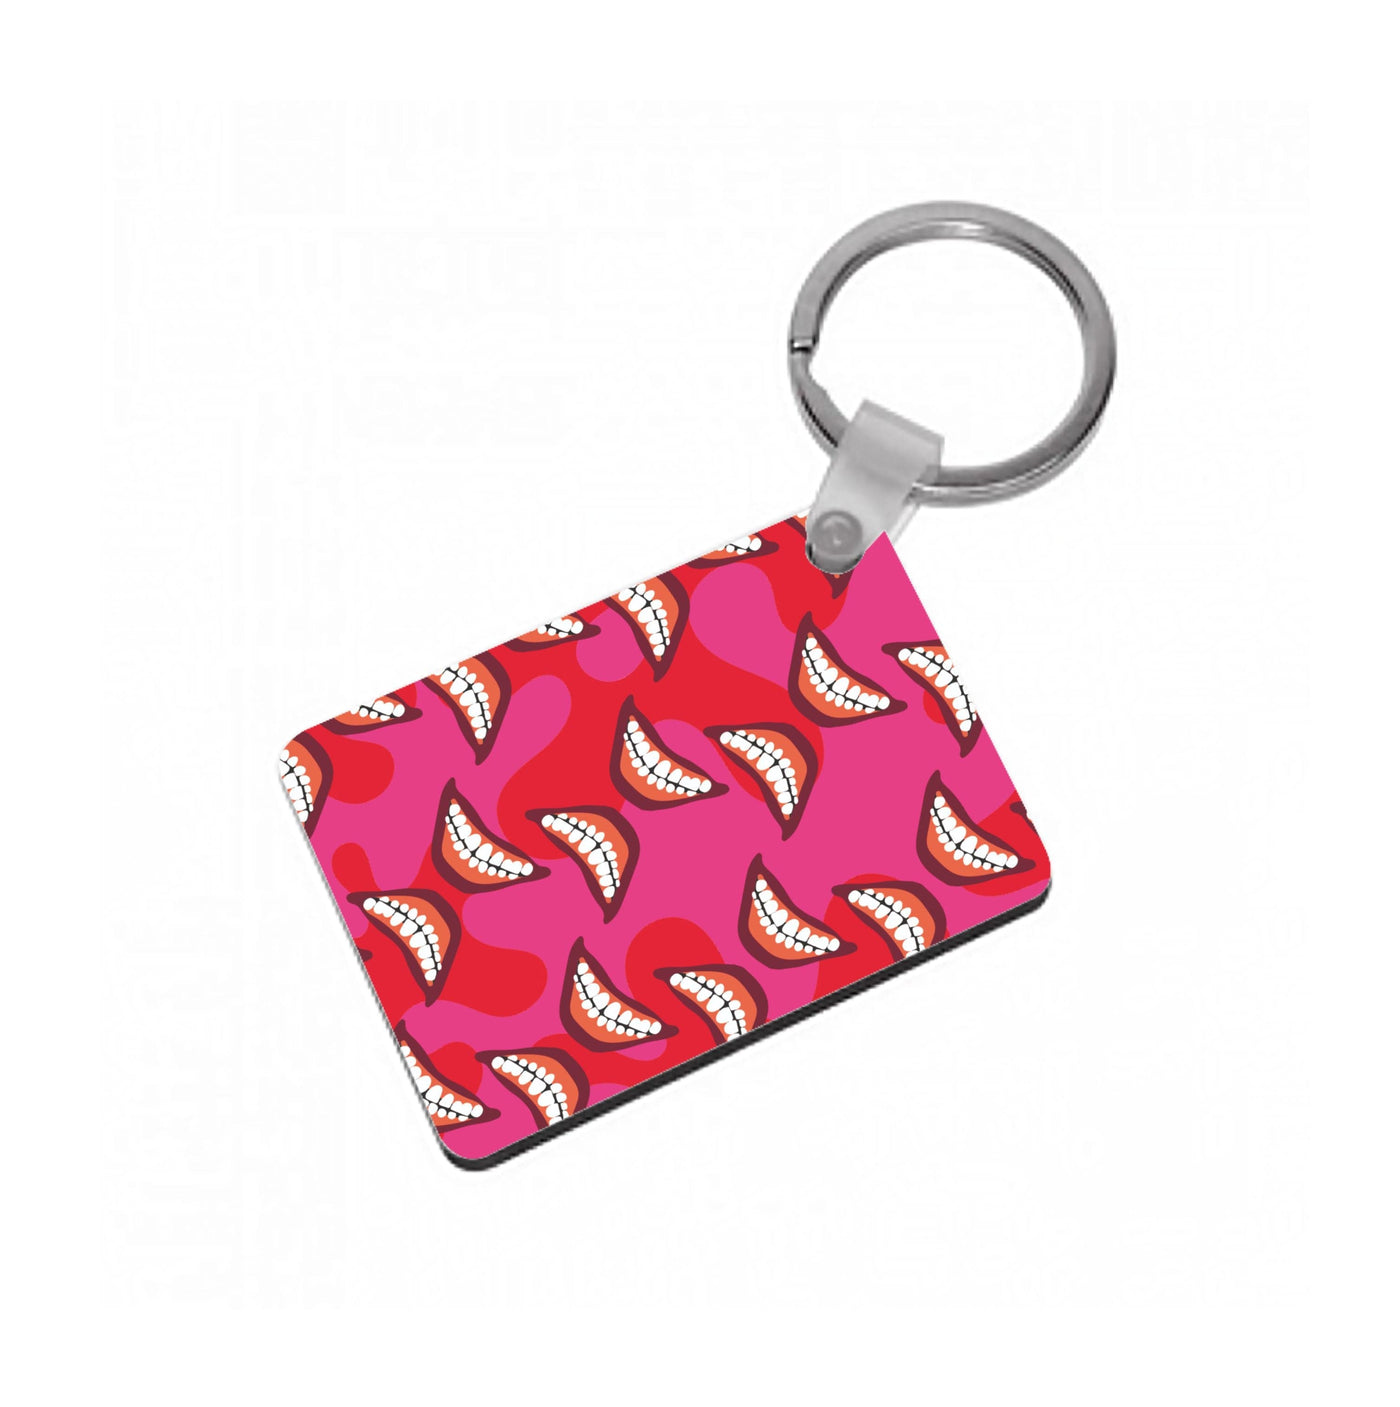 Mouth Pattern - American Horror Story Keyring